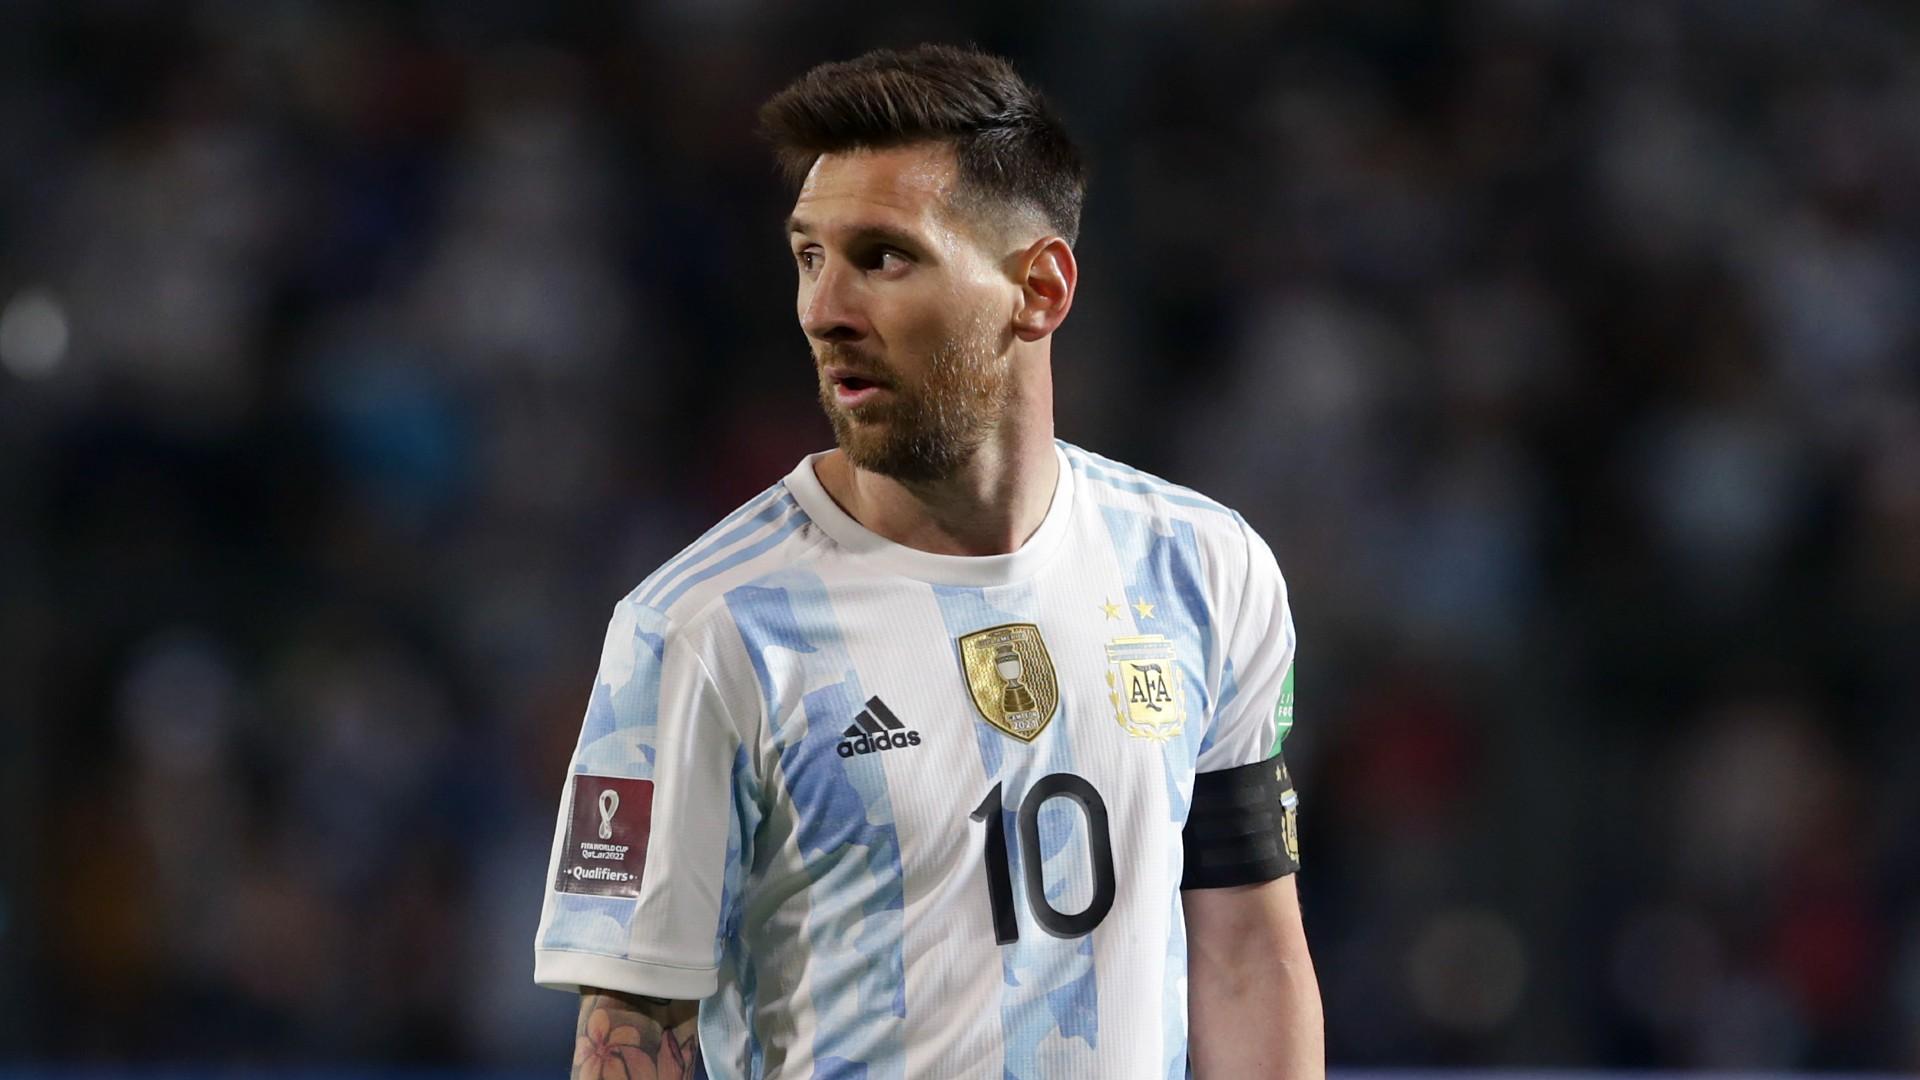 Argentina World Cup draw 2022: Group C results with Mexico, matches, fixtures, star players, roster and coach